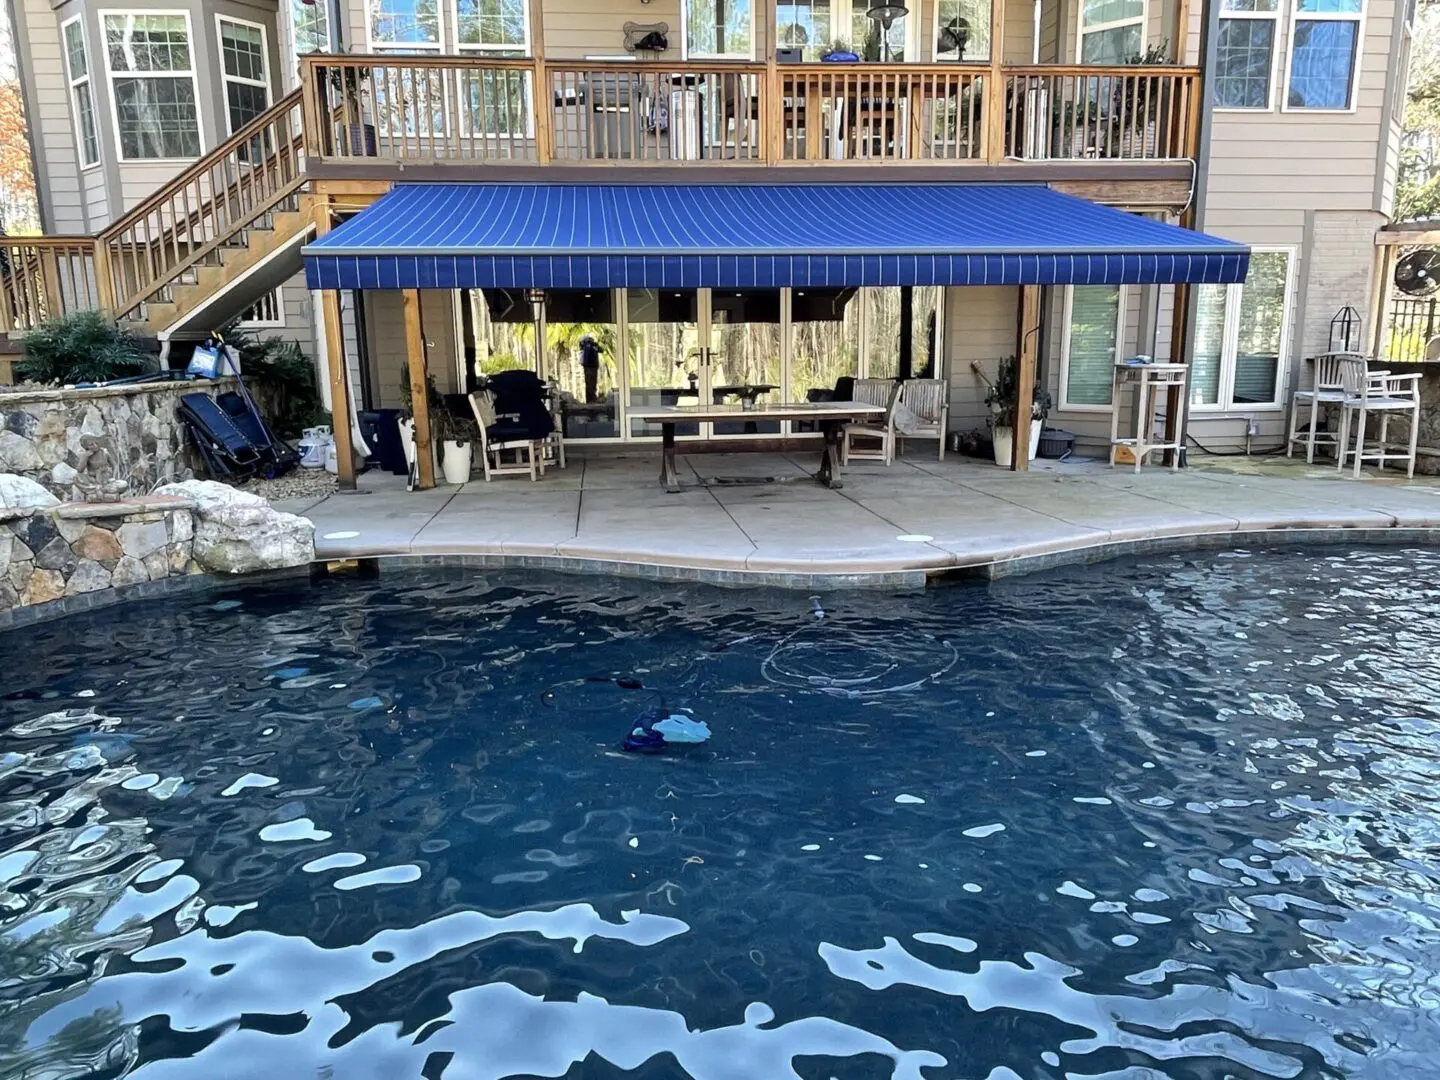 Retractable Awning in the restaurant for pool area